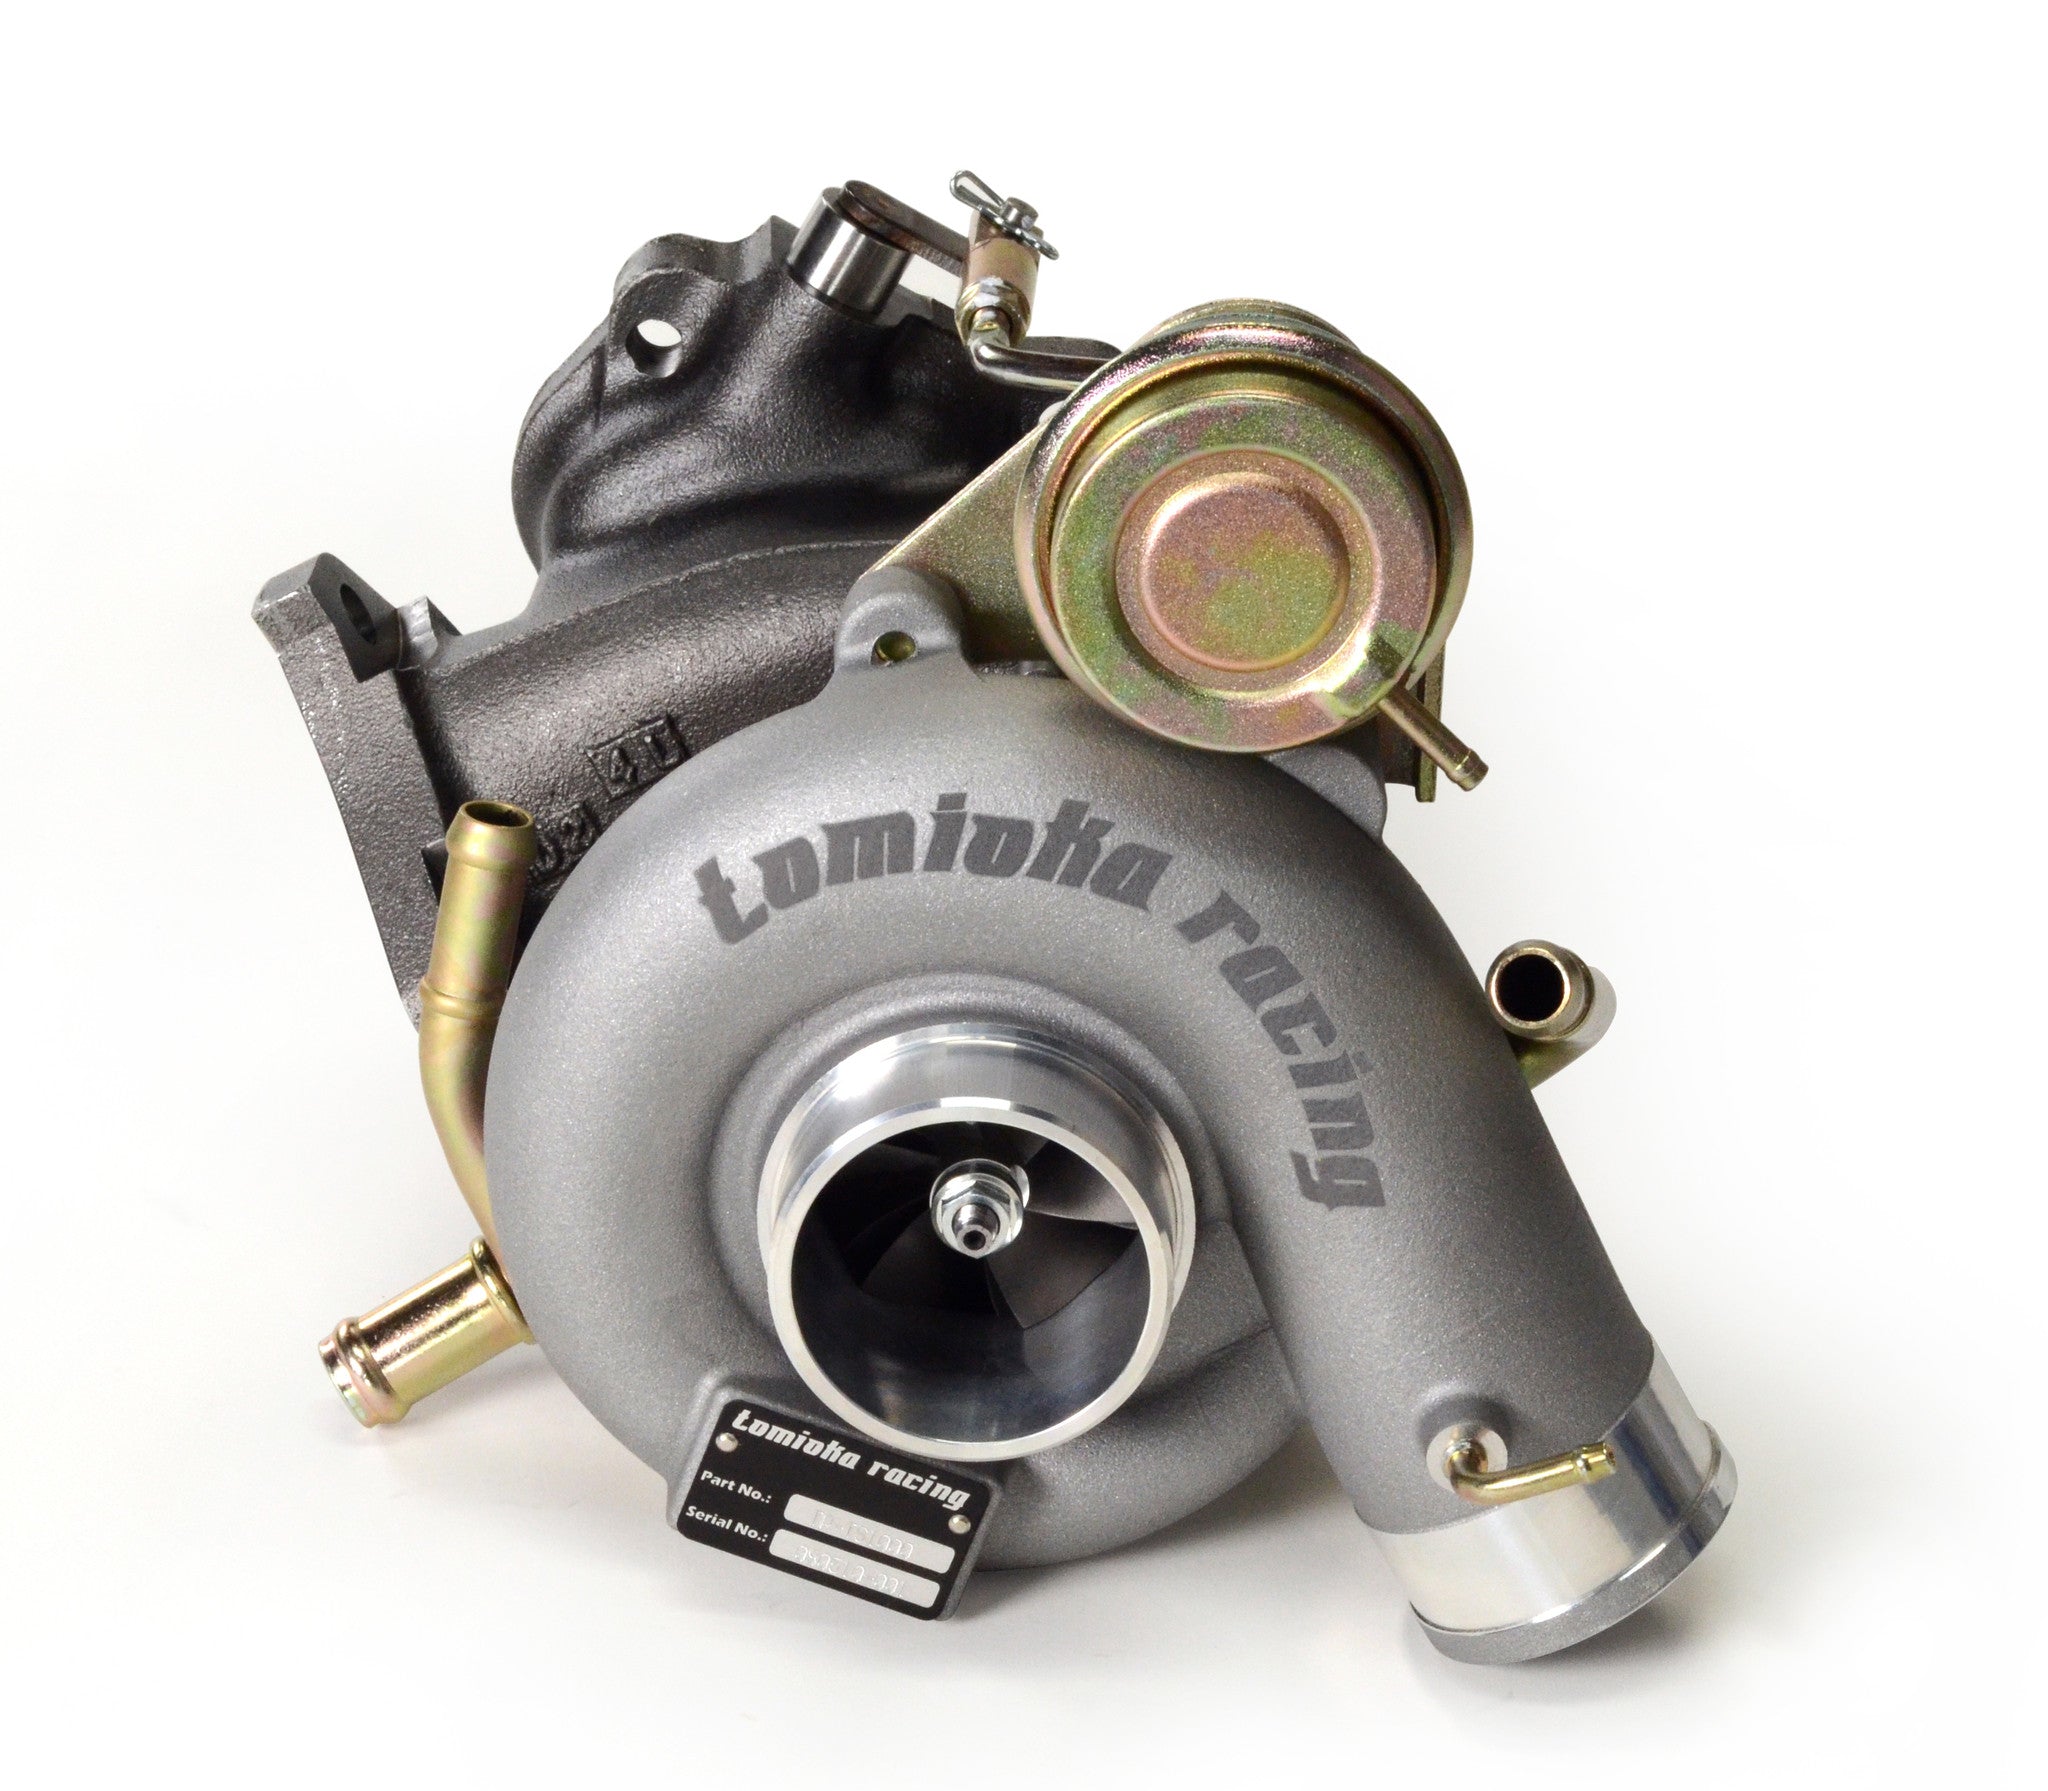 TR TD05-18G Turbo for Subaru WRX 2002-2007 and STI 2002-2010 w/ Billet Actuator and Motul 300V Power &  Competition